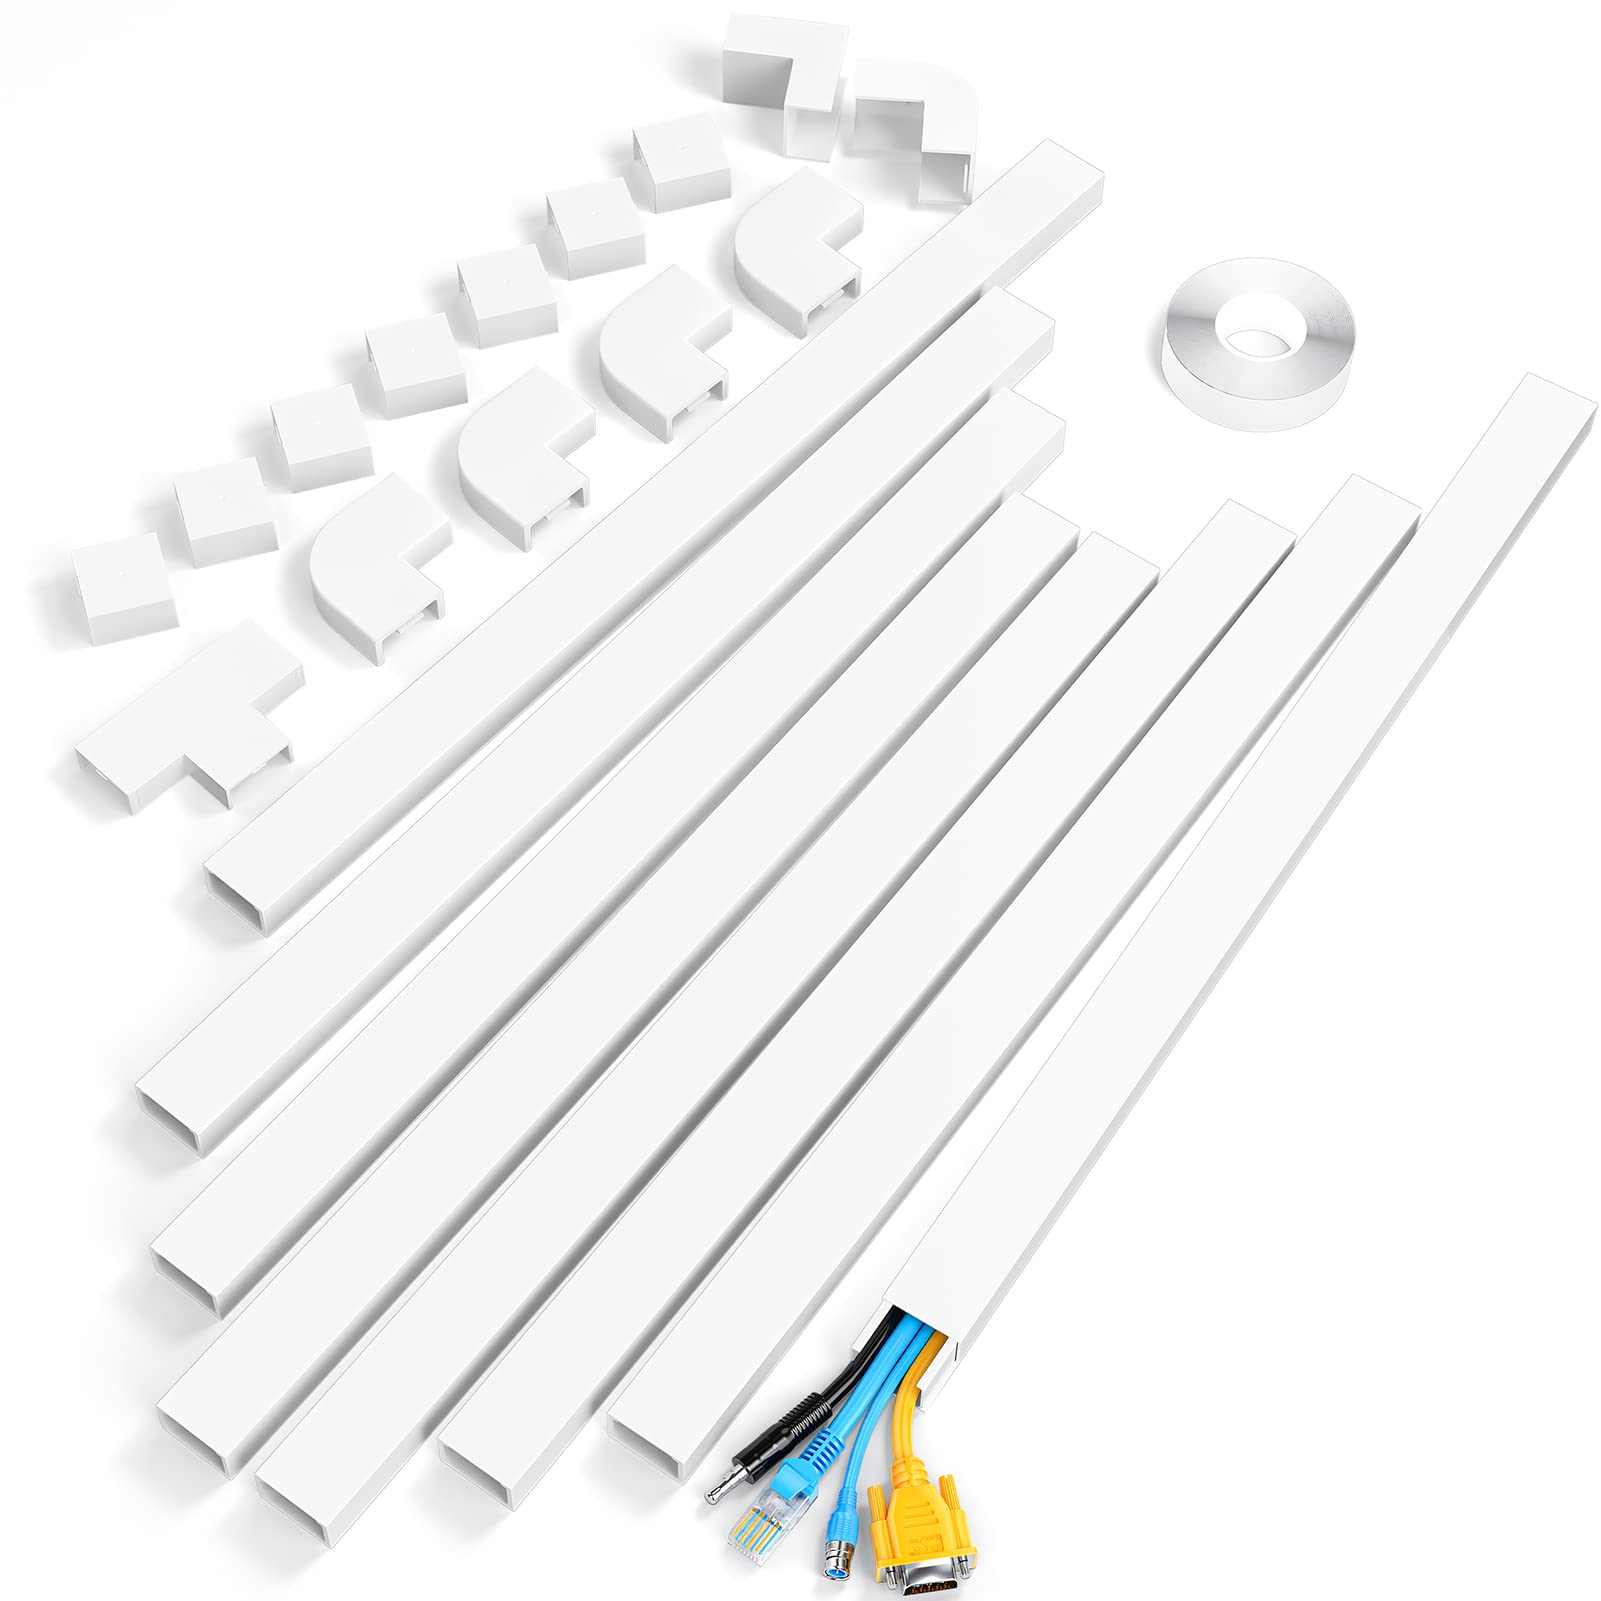 Yecaye 125 Cable Raceway Kit One-Cord Channel Cord Cover on Wall  CMC-03-Large White 